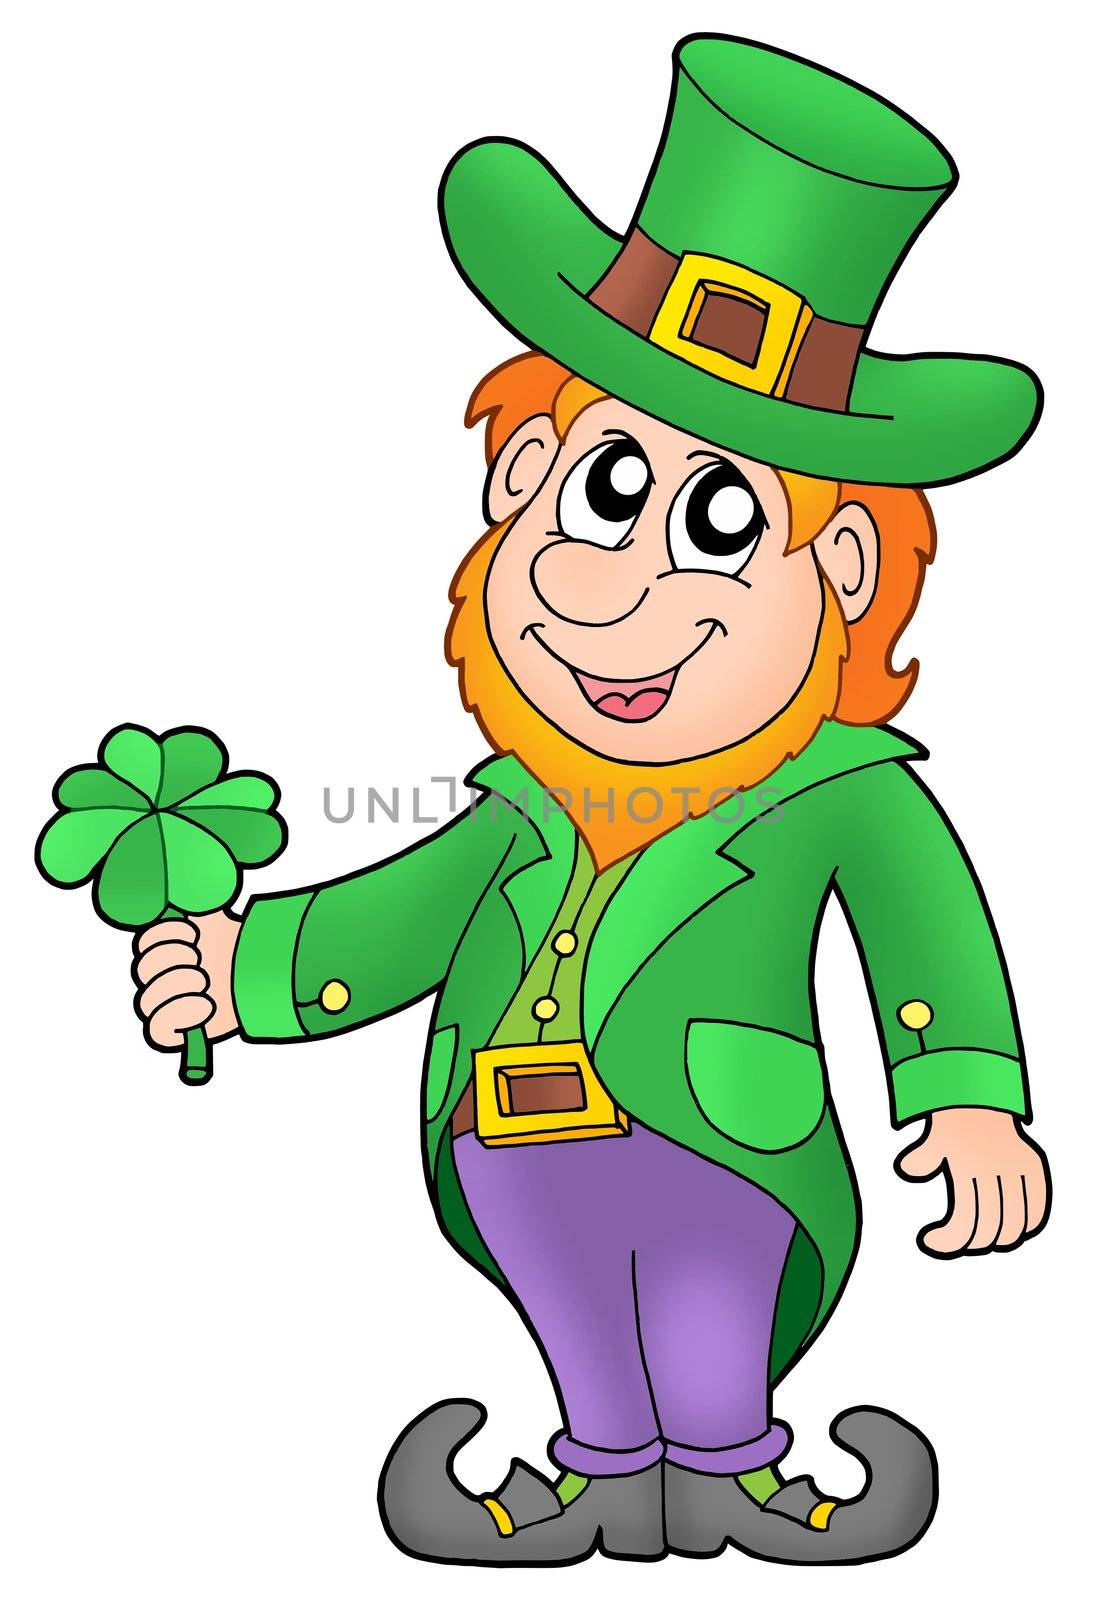 Leprechaun with four leaves clover - color illustration.